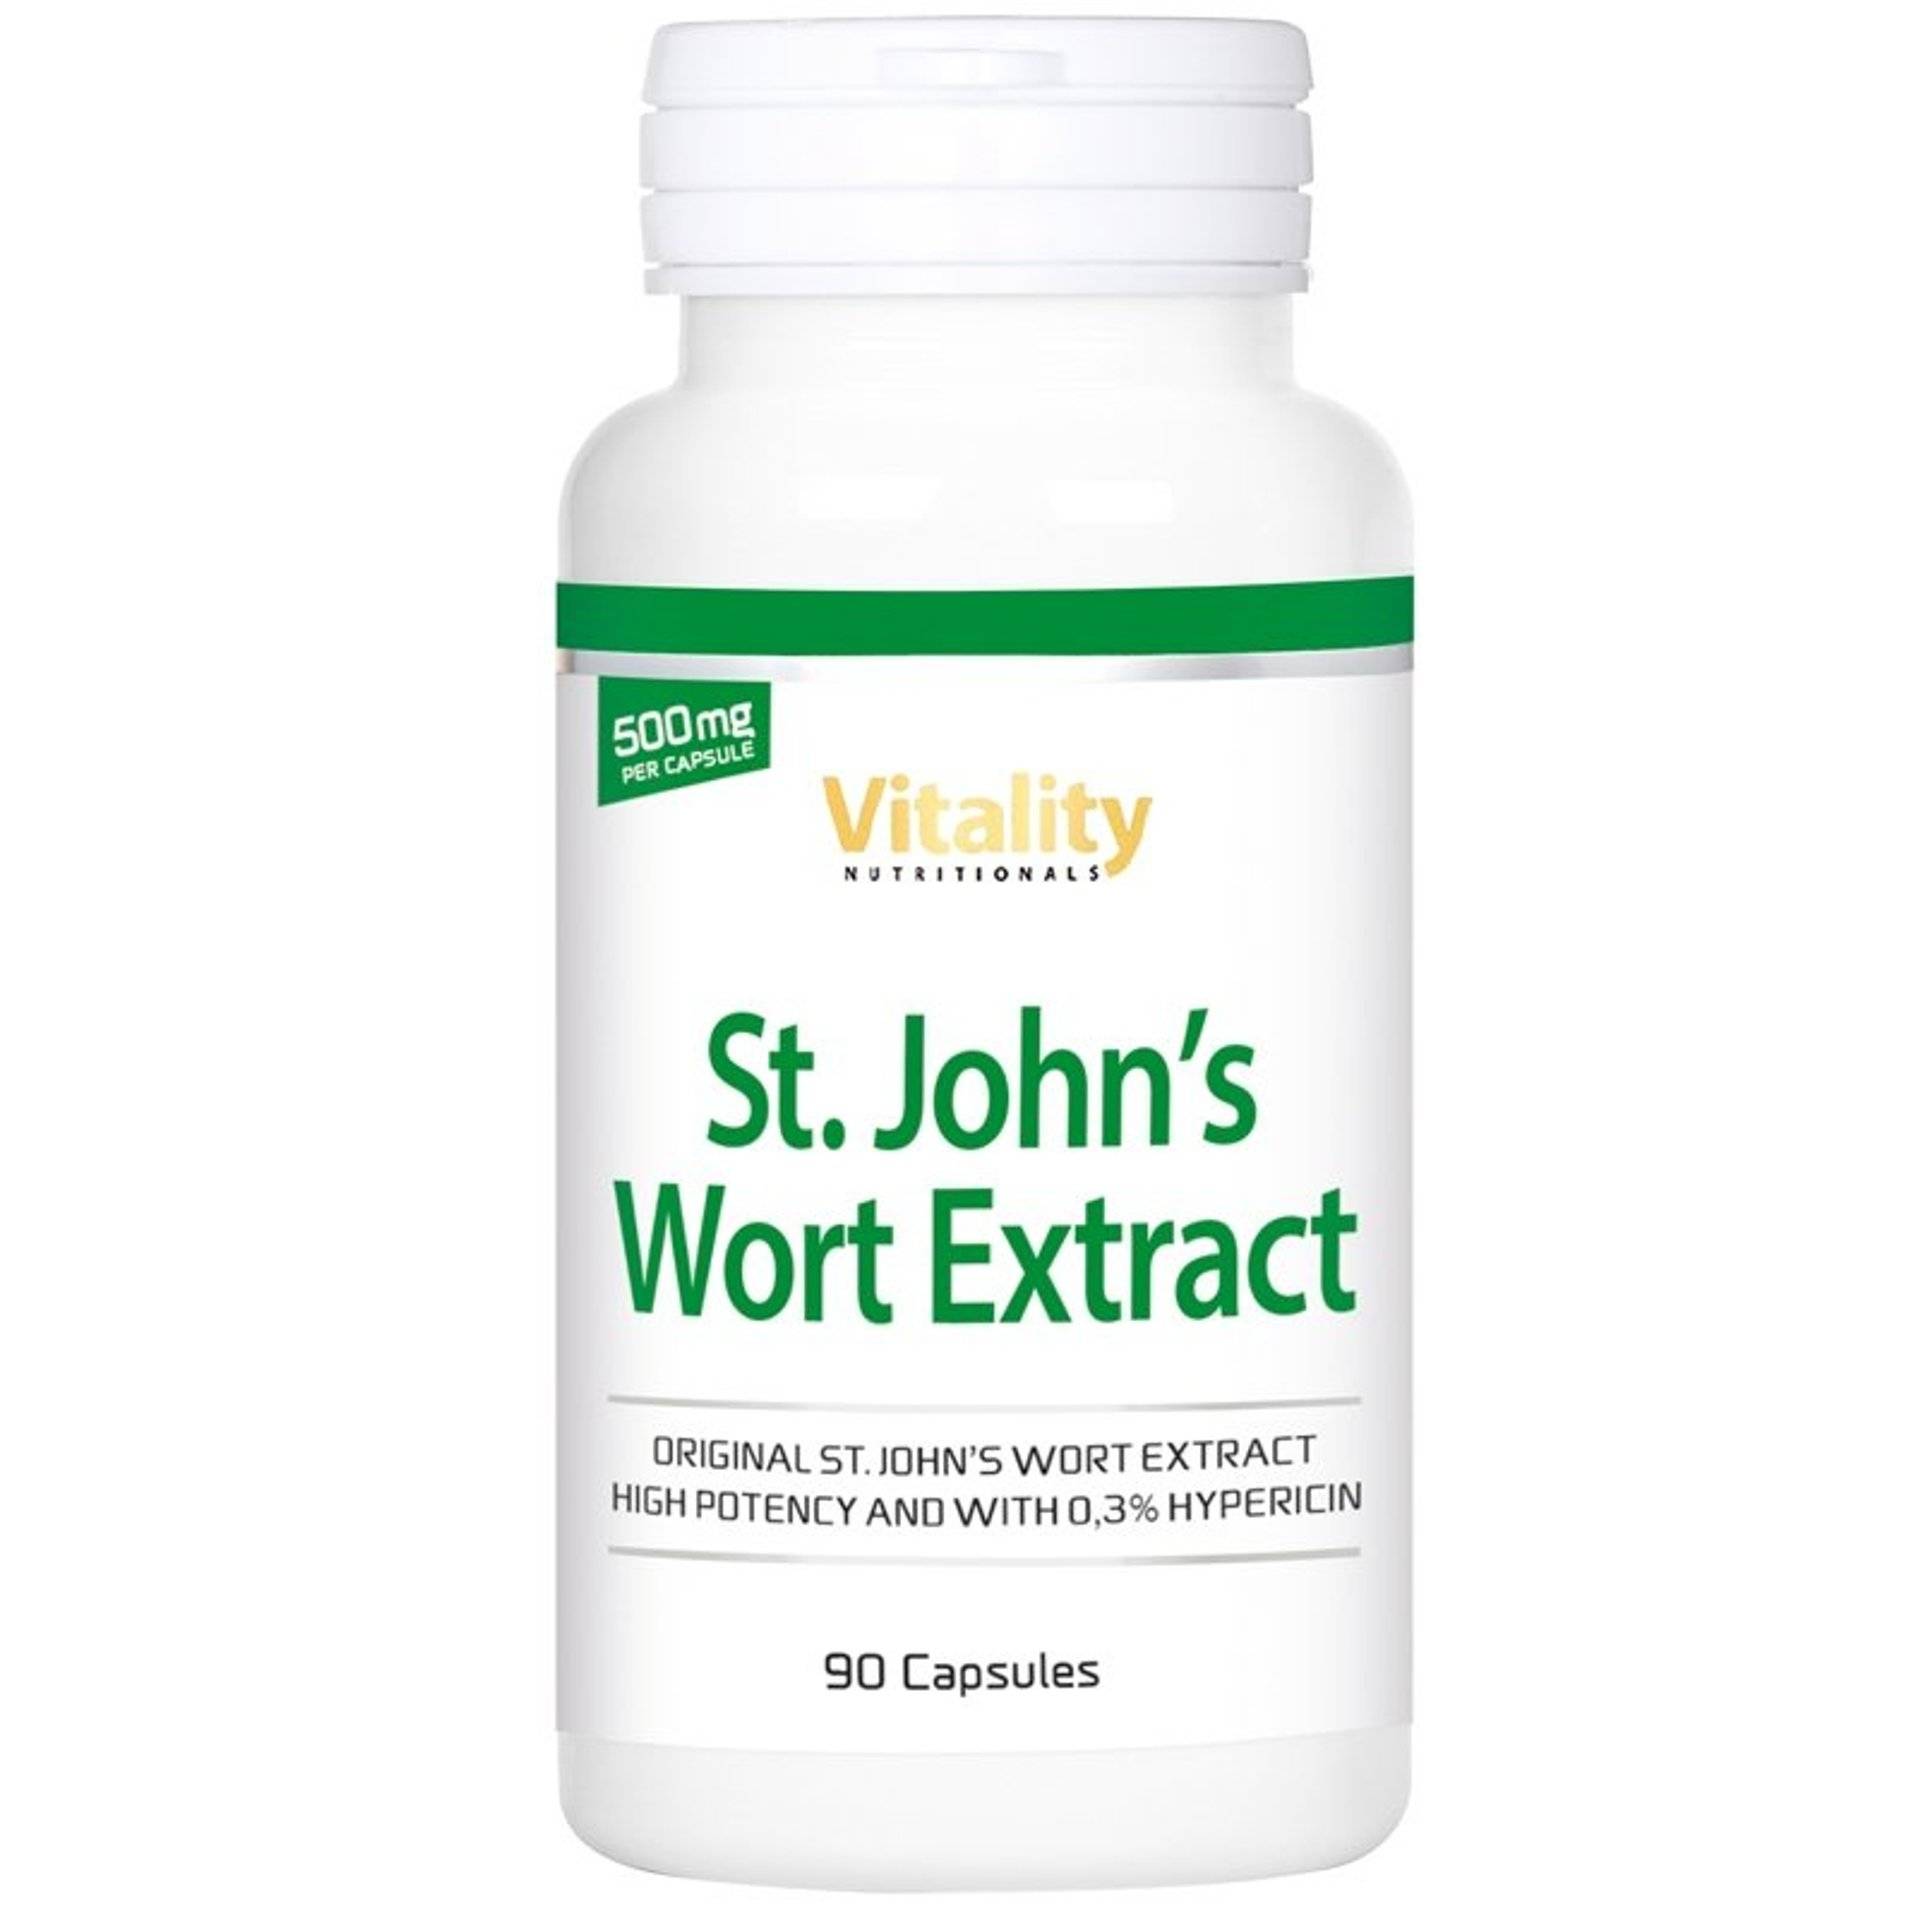 Buying St. John's Wort - What you should know